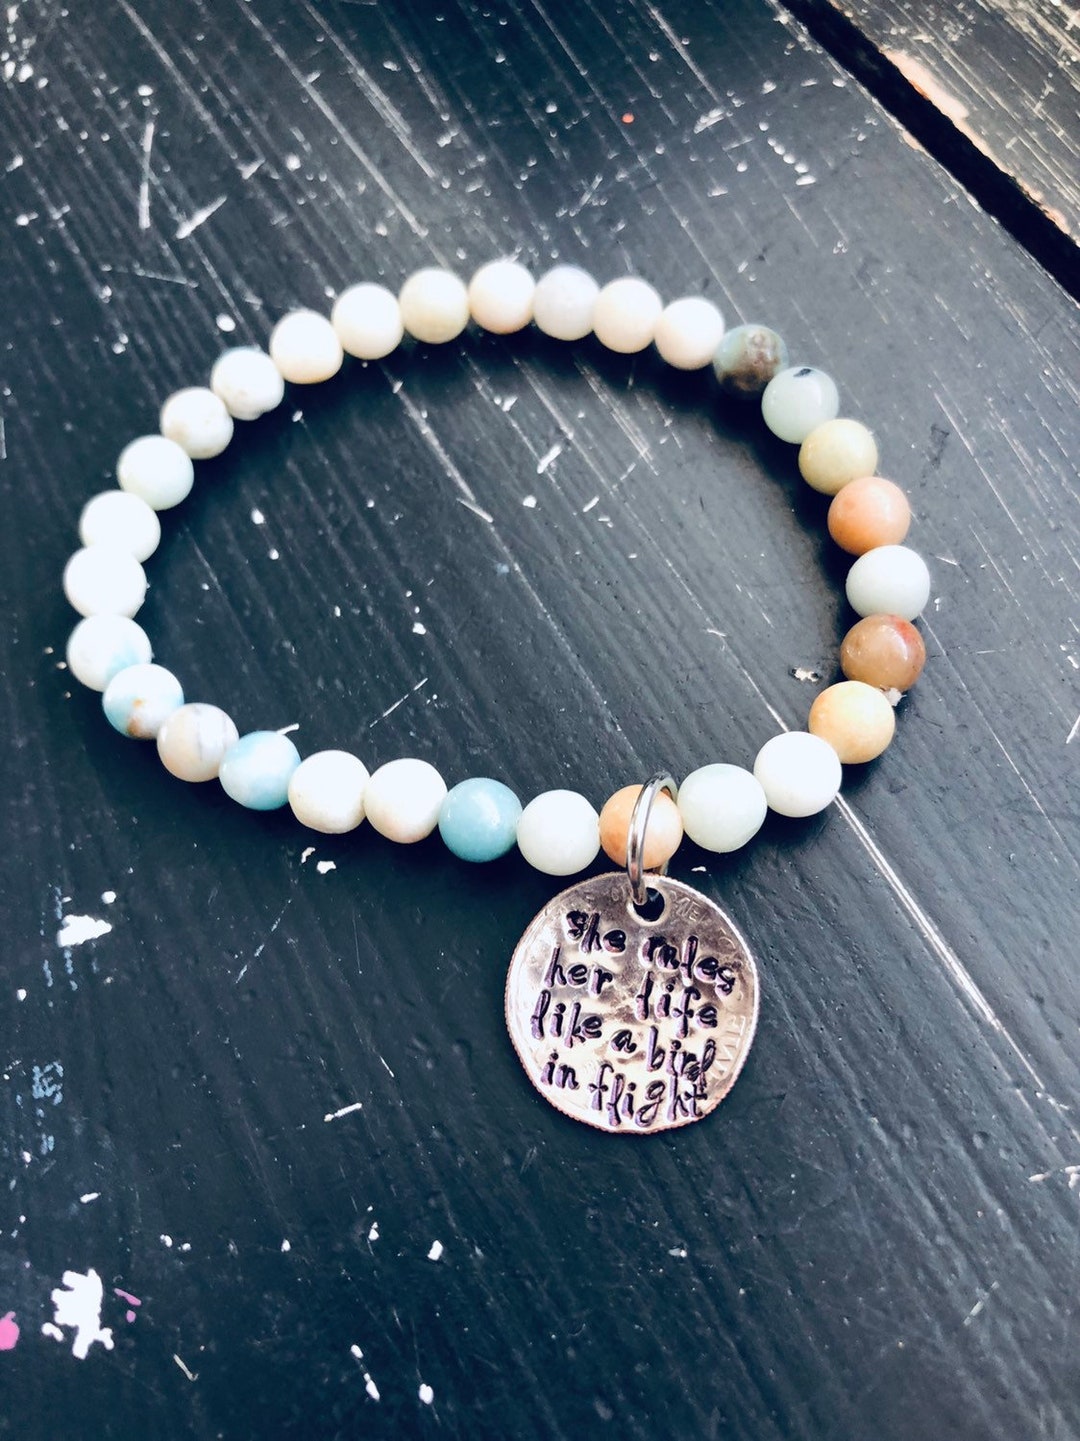 She Rules Her Life Like a Bird in Flight Stone Beads - Etsy